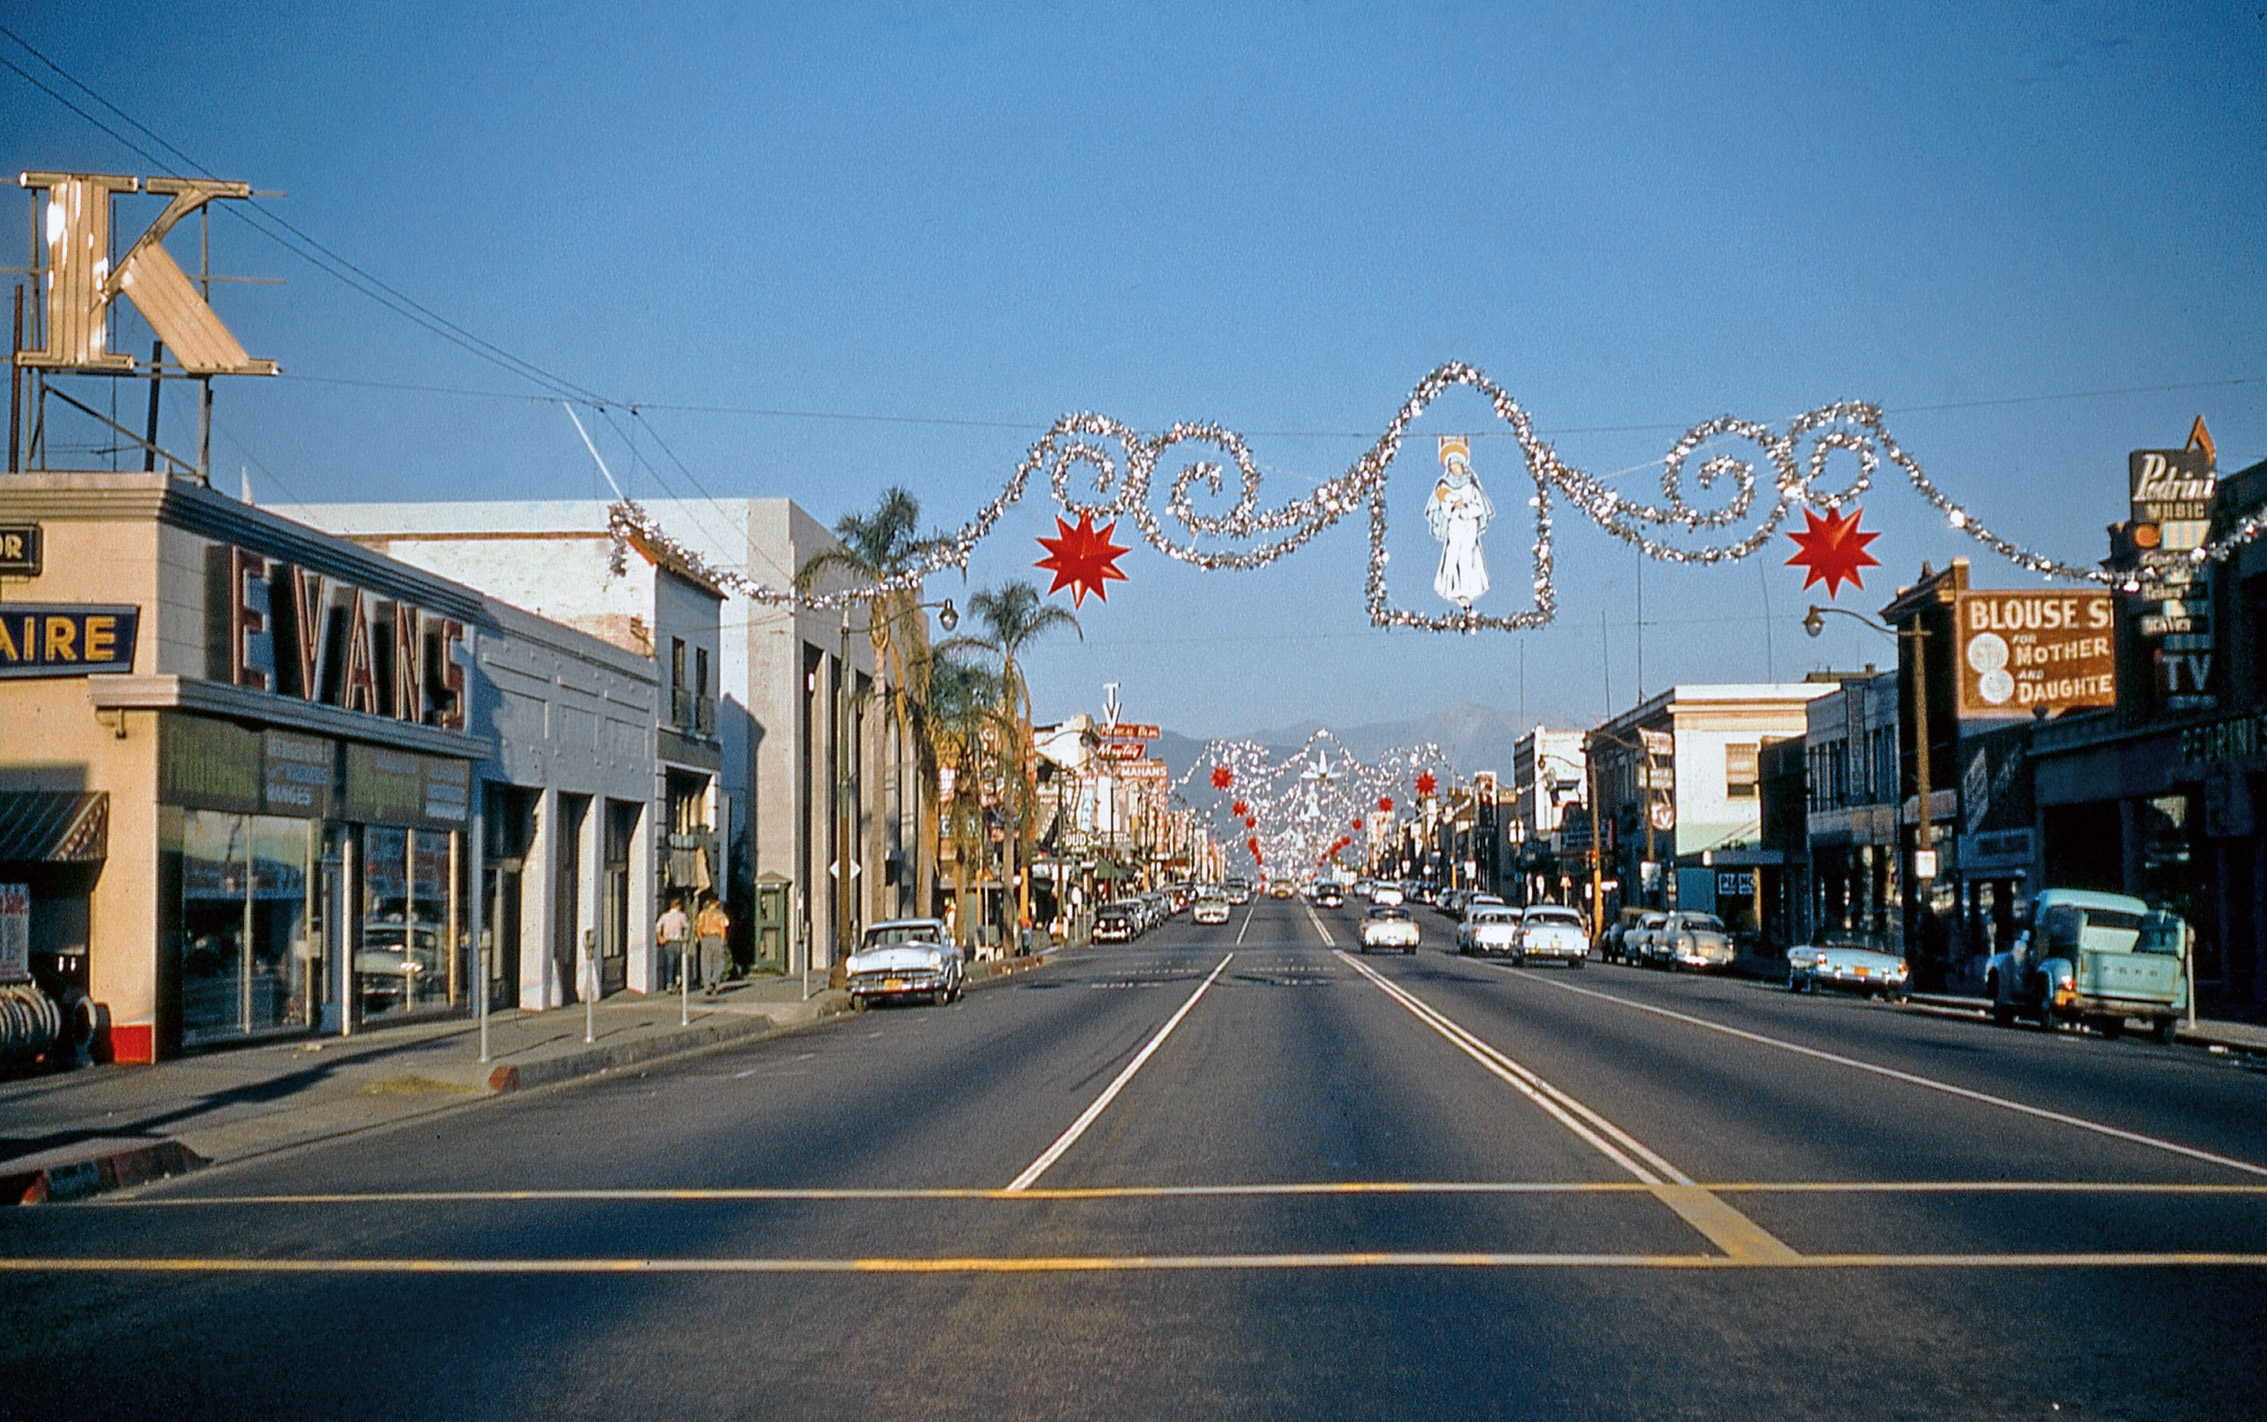 &nbsp; &nbsp; &nbsp; &nbsp; Location Update: West Main Street in Alhambra, California.
Another look at the street seen earlier here. 35mm Kodachrome. View full size.